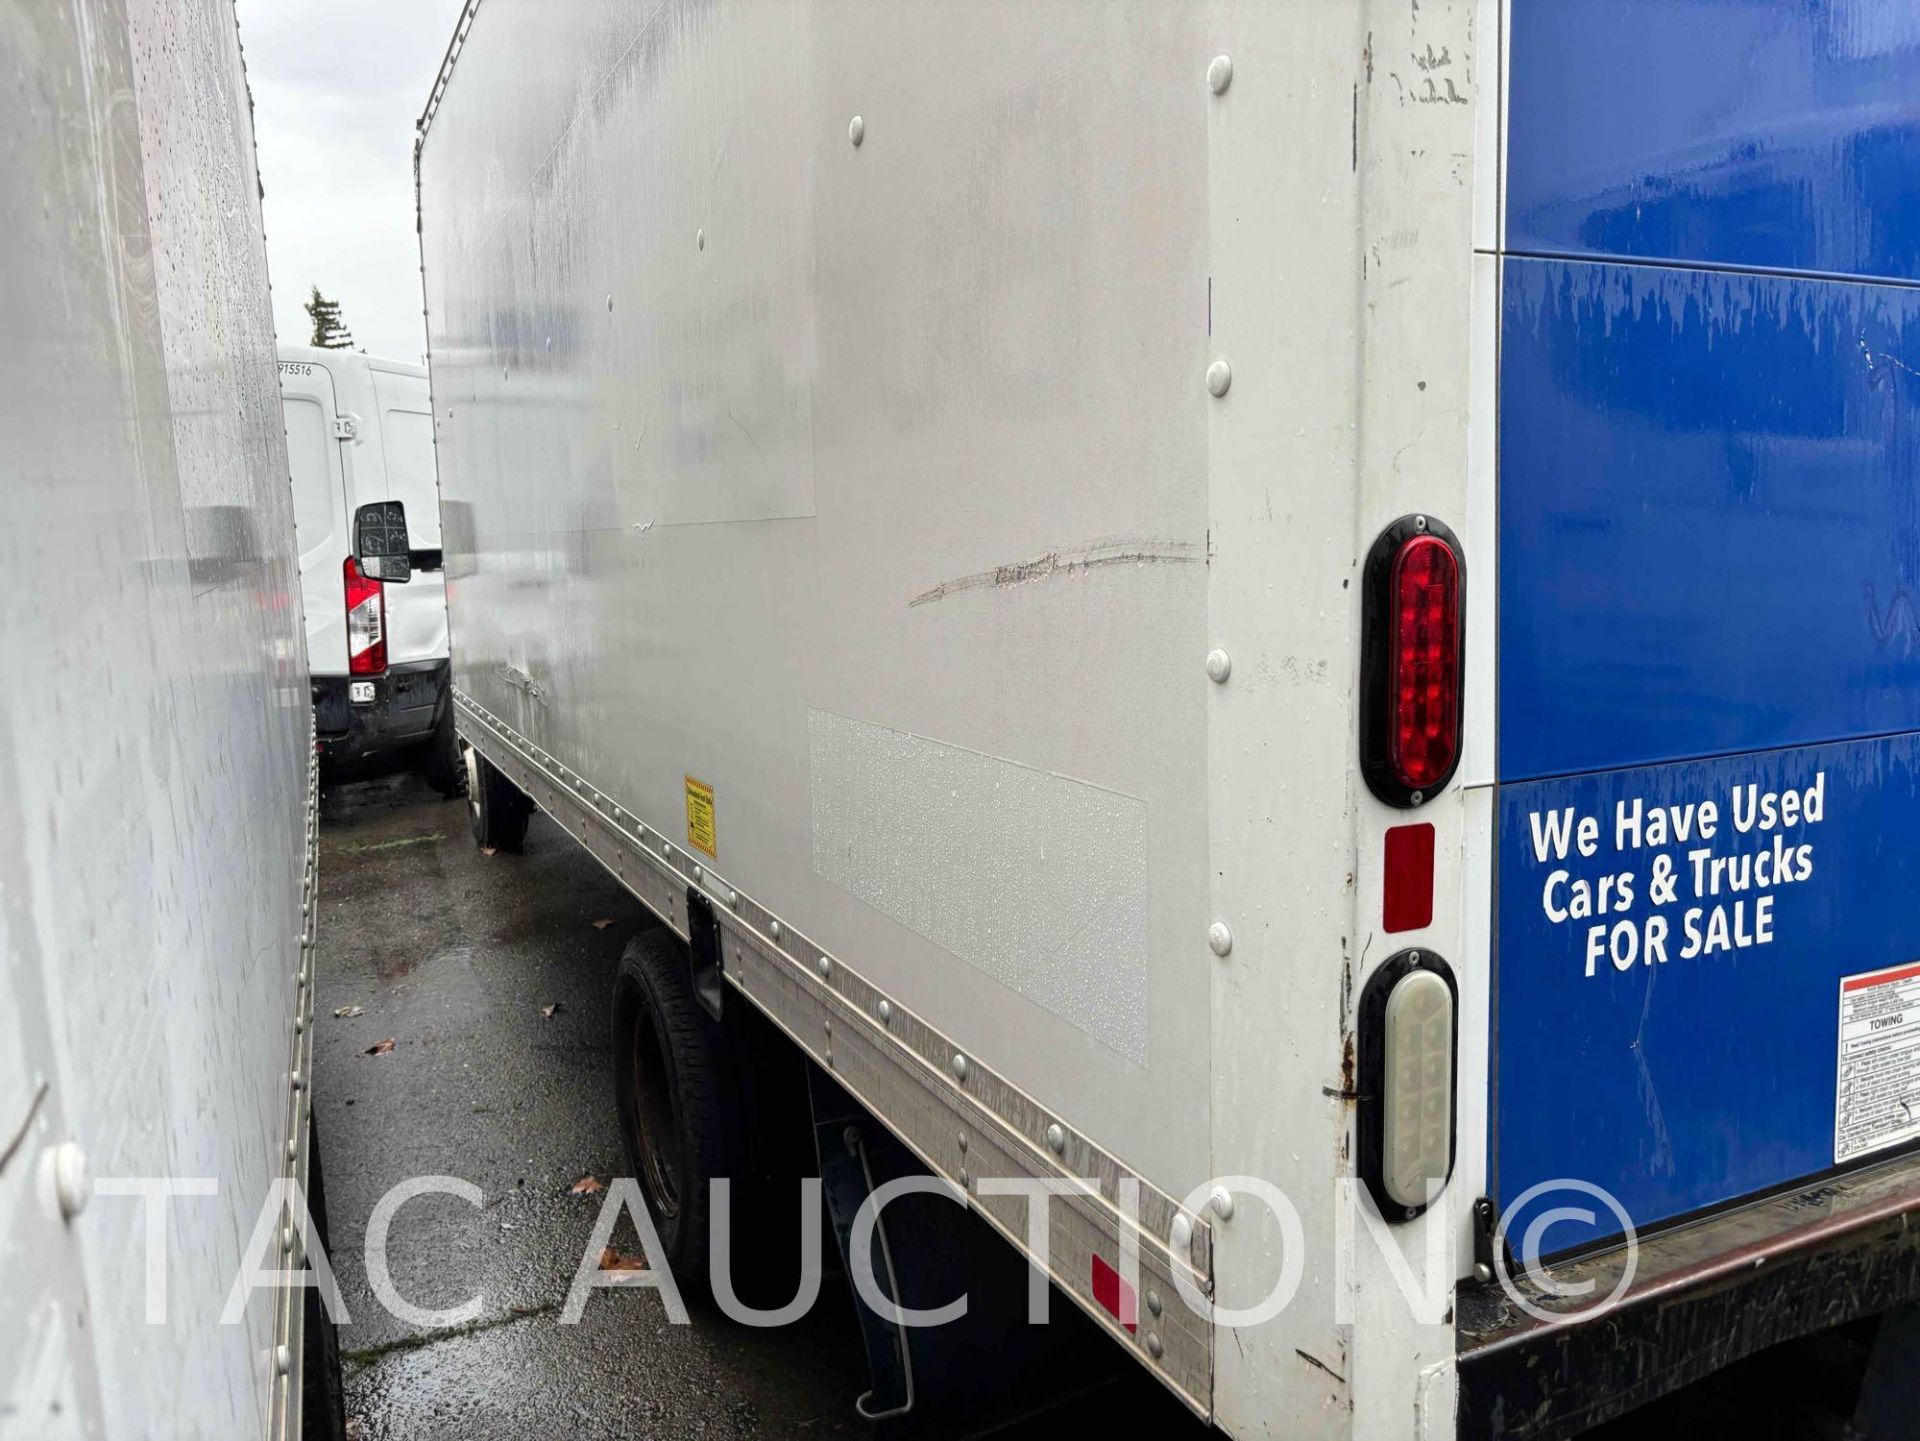 2014 Ford E-350 16ft Box Truck - Image 45 of 82